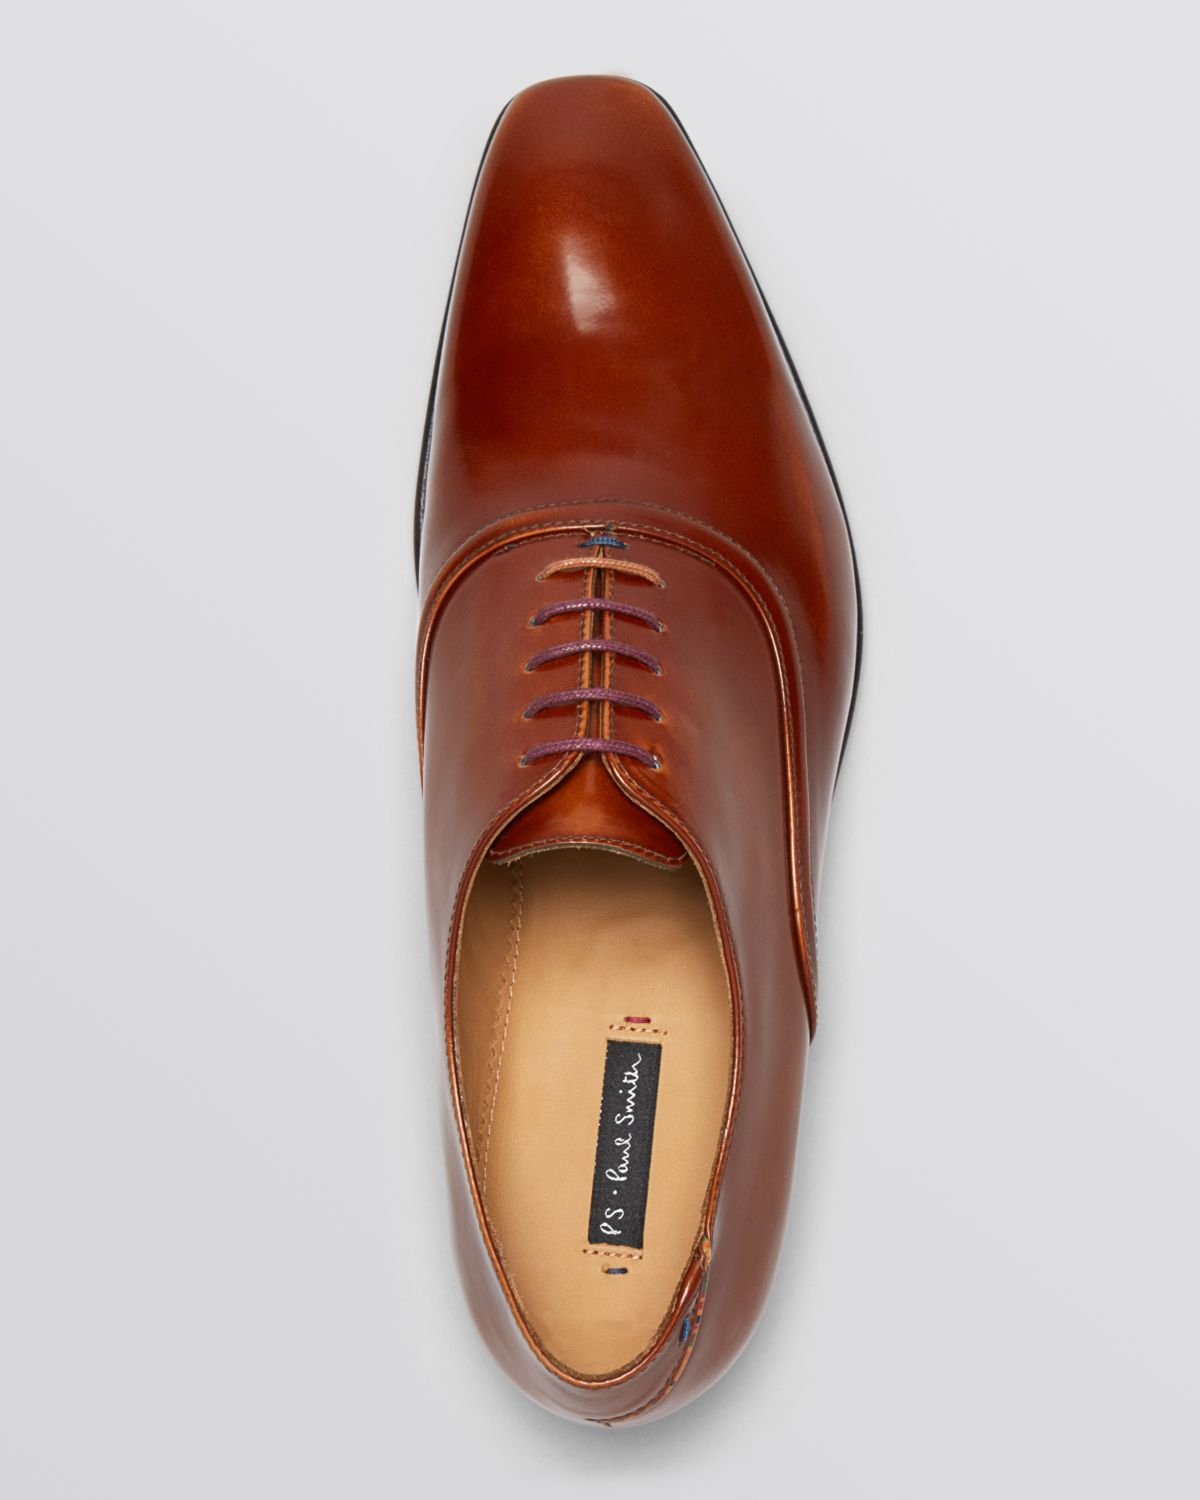 Paul Smith Starling High Shine Oxfords in Tan (Brown) for Men - Lyst